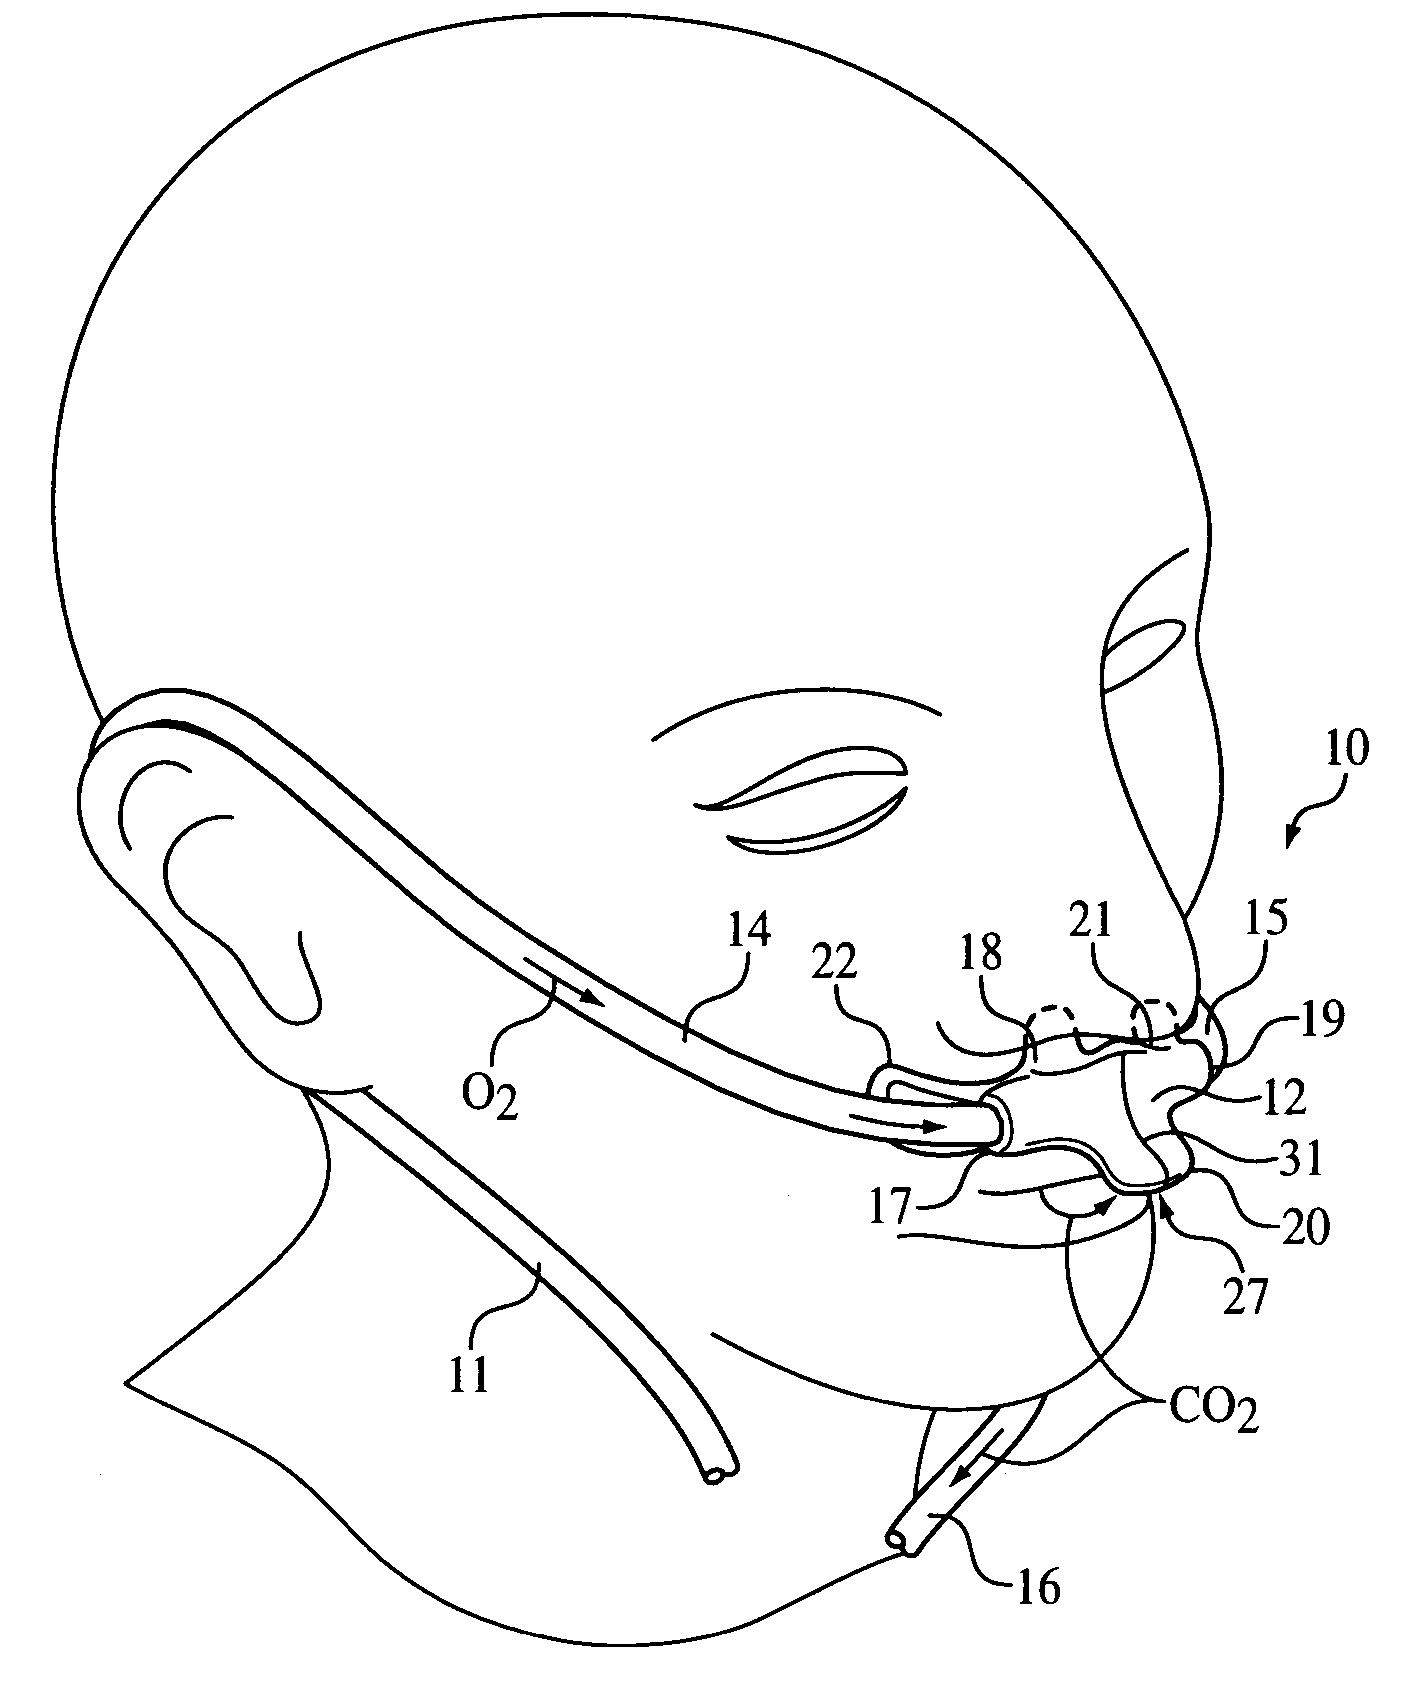 Nasal and oral patient interface